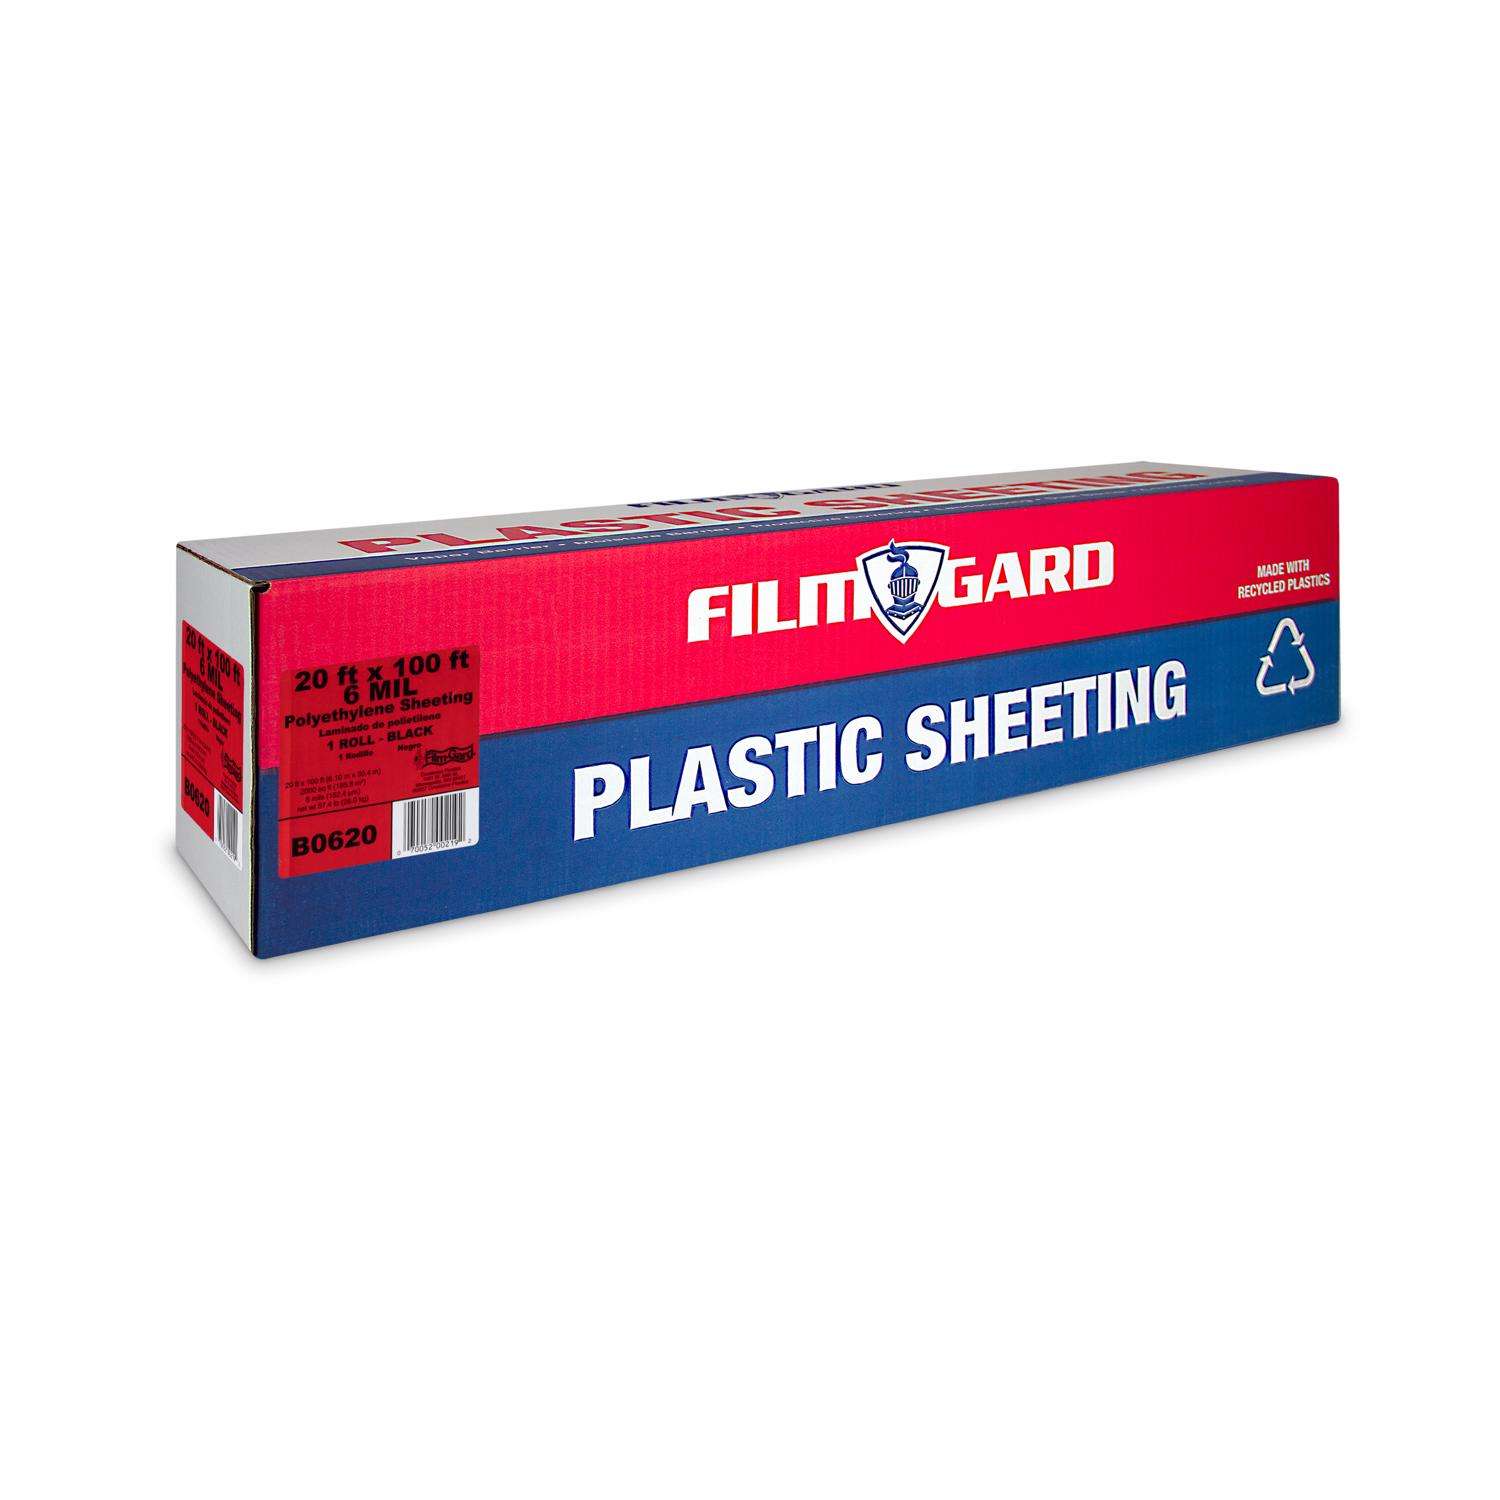 Husky Poly Sheeting Clear Polyethylene 4 Mil 10' X 100' - Buy Janitorial  Direct